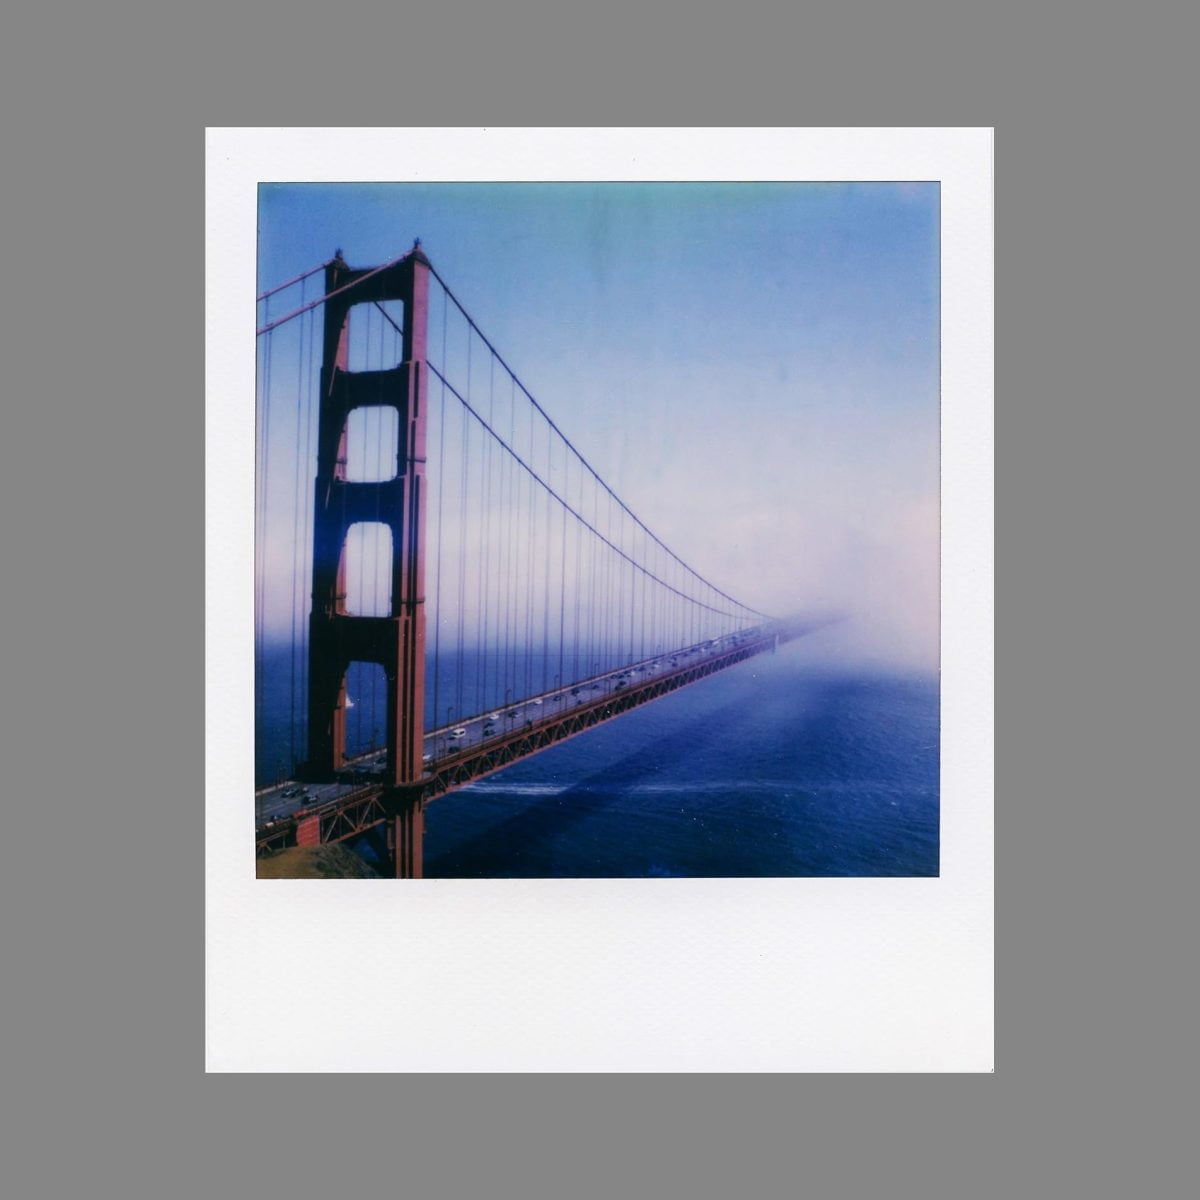 Frame 261 Polaroid &Lt;Section Data-Product-Standalone=&Quot;&Quot; Data-Product-Handle=&Quot;Color-Itype-Instant-Film&Quot; Data-Variant-Title=&Quot;&Quot; Data-Variant-Id=&Quot;31442153078902&Quot; Data-Section-Id=&Quot;Product&Quot; Data-Section-Type=&Quot;Product&Quot; Data-Enable-History-State=&Quot;True&Quot;&Gt; &Lt;Div Class=&Quot;Product Product-Theme--Color&Quot; Data-Js-Product-Id=&Quot;4416939393142&Quot;&Gt;&Lt;Form Class=&Quot;Product-Hero-Actions&Quot; Action=&Quot;Https://Eu.polaroid.com/Cart/Add&Quot; Enctype=&Quot;Multipart/Form-Data&Quot; Method=&Quot;Post&Quot;&Gt; &Lt;Div Class=&Quot;Product-Item Max-Wrapper&Quot;&Gt; &Lt;Div Class=&Quot;Product__Detail&Quot;&Gt; &Lt;Div Class=&Quot;Product-Details&Quot;&Gt; &Lt;Div Class=&Quot;Product-Details__Description&Quot;&Gt; &Lt;Div Class=&Quot;Product-Details__Description--First&Quot;&Gt; &Lt;Ul Class=&Quot;A-Unordered-List A-Vertical A-Spacing-Mini&Quot;&Gt; &Lt;Li Class=&Quot;A-Spacing-Mini&Quot;&Gt;&Lt;Span Class=&Quot;A-List-Item&Quot;&Gt;Double Pack Film: Polaroid Instant Color Film For I-Type Cameras With Two Packs Of 8 Count Film For A Total Of 16 Photos.&Lt;/Span&Gt;&Lt;/Li&Gt; &Lt;Li Class=&Quot;A-Spacing-Mini&Quot;&Gt;&Lt;Span Class=&Quot;A-List-Item&Quot;&Gt;Light It Up: Polaroid Instant Film Loves Light. The More Light In Your Shot, The Better Your Photo Will Turn Out. Always Shoot In Bright Light Or Use The Camera Flash.&Lt;/Span&Gt;&Lt;/Li&Gt; &Lt;Li Class=&Quot;A-Spacing-Mini&Quot;&Gt;&Lt;Span Class=&Quot;A-List-Item&Quot;&Gt;Develop: All Photos Appear Blank At First. Photos Develop Within 15 Minutes. Shield Photos From The Light And Place Them Face Down As They Develop.&Lt;/Span&Gt;&Lt;/Li&Gt; &Lt;Li Class=&Quot;A-Spacing-Mini&Quot;&Gt;&Lt;Span Class=&Quot;A-List-Item&Quot;&Gt;Create: Every Photo You Create Is Rich Textured And Unique. Unpredictable, Imperfect, And Impossible To Reproduce.&Lt;/Span&Gt;&Lt;/Li&Gt; &Lt;Li Class=&Quot;A-Spacing-Mini&Quot;&Gt;&Lt;Span Class=&Quot;A-List-Item&Quot;&Gt;Store Chilled: Temperature Affects How The Film Works So Keep It Stored Chilled In The Fridge, Do Not Freeze.&Lt;/Span&Gt;&Lt;/Li&Gt; &Lt;/Ul&Gt; &Lt;/Div&Gt; &Lt;/Div&Gt; &Lt;/Div&Gt; &Lt;/Div&Gt; &Lt;/Div&Gt; &Lt;/Form&Gt;&Lt;/Div&Gt; &Lt;/Section&Gt; Polaroid I-Type Color Film - Double Pack (6009) Polaroid I-Type Color Film - Double Pack (6009)